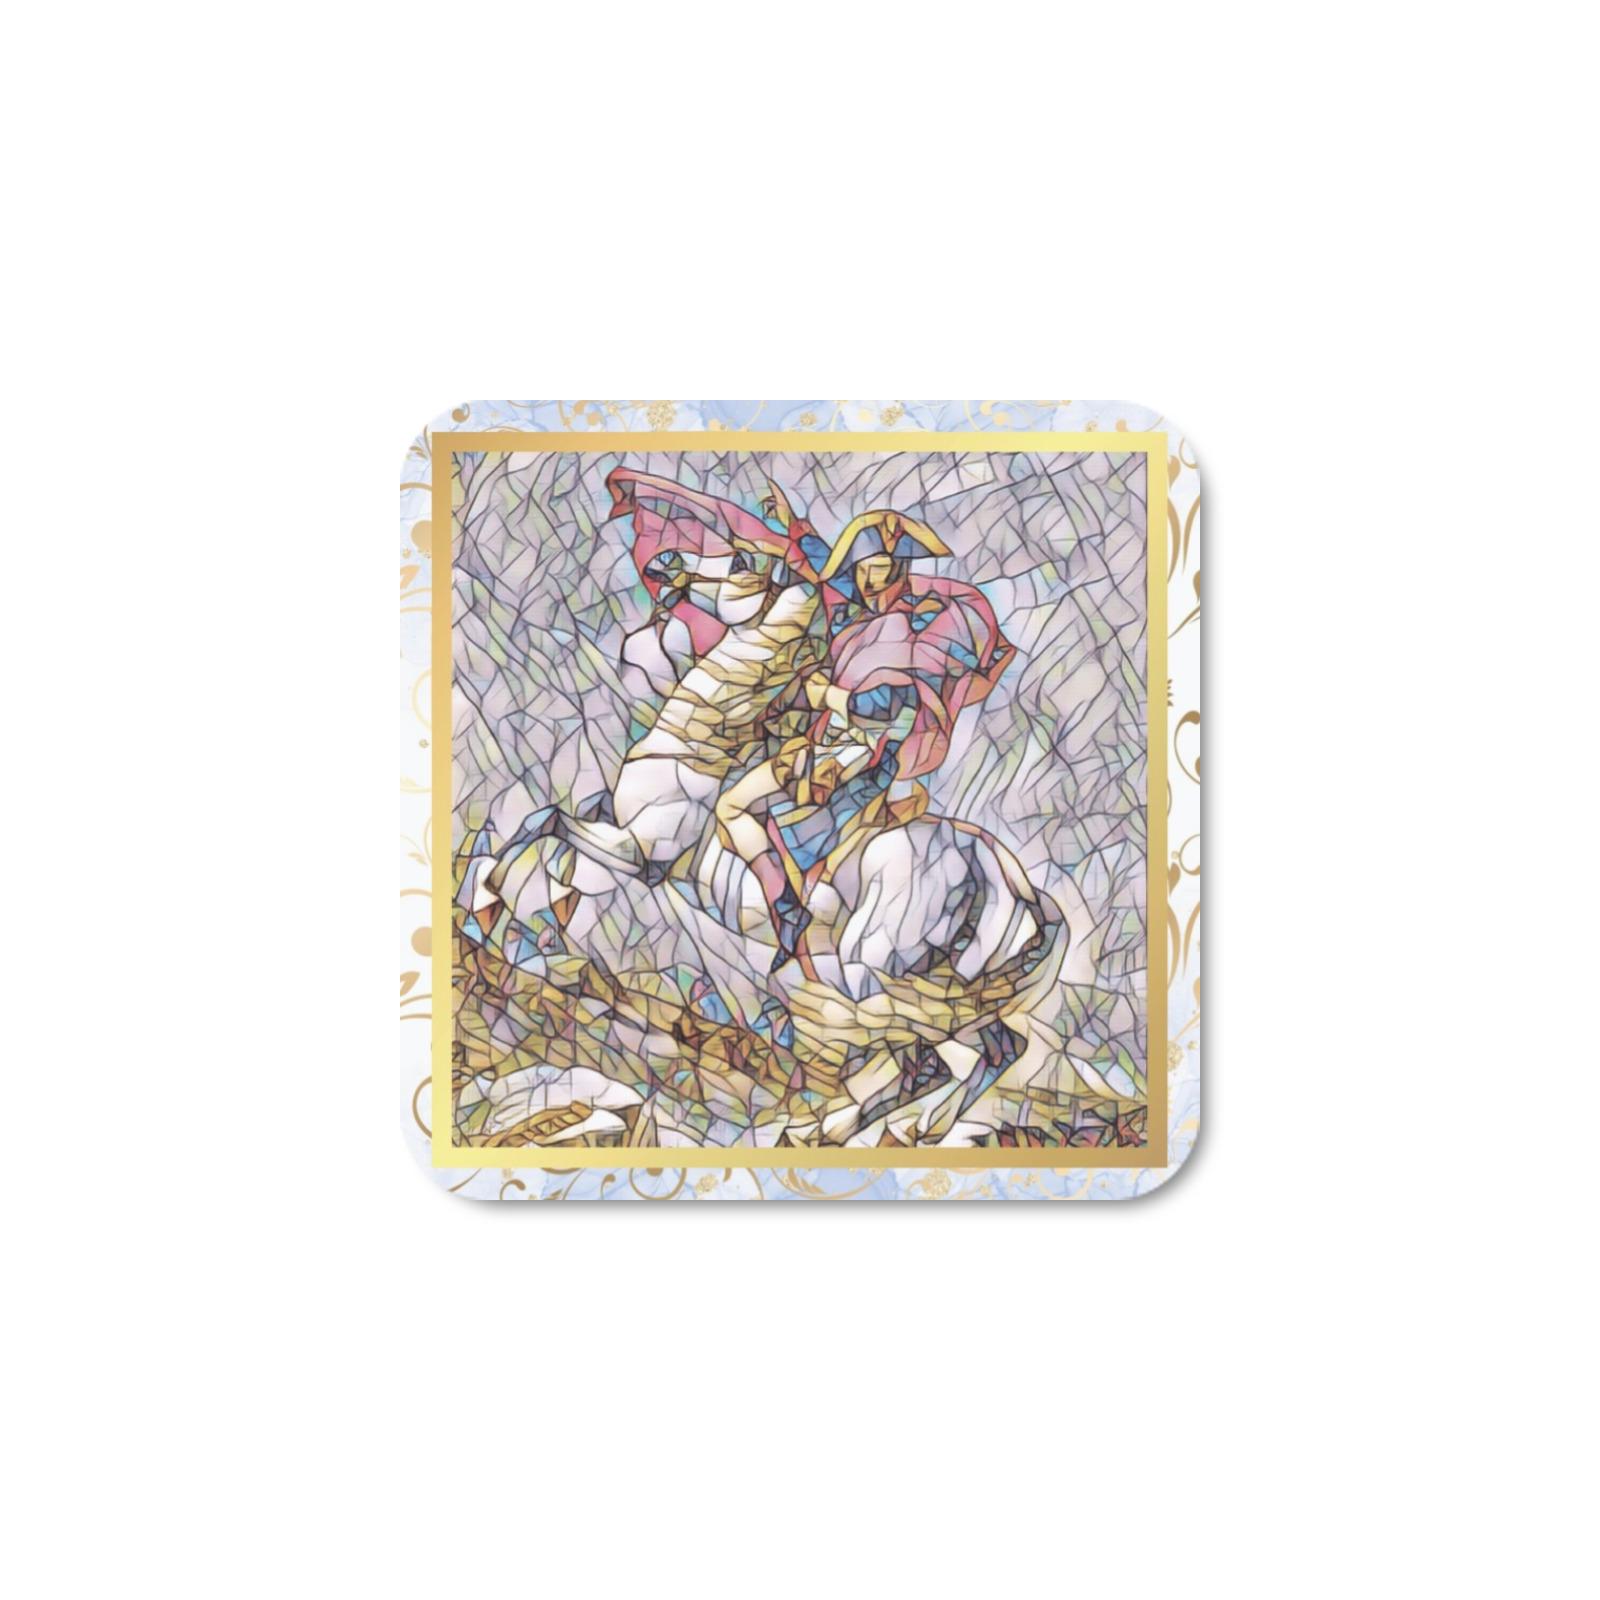 Second Remastered Version of Napoleon Crossing The Alps by Jacques-Louis David Square Fridge Magnet